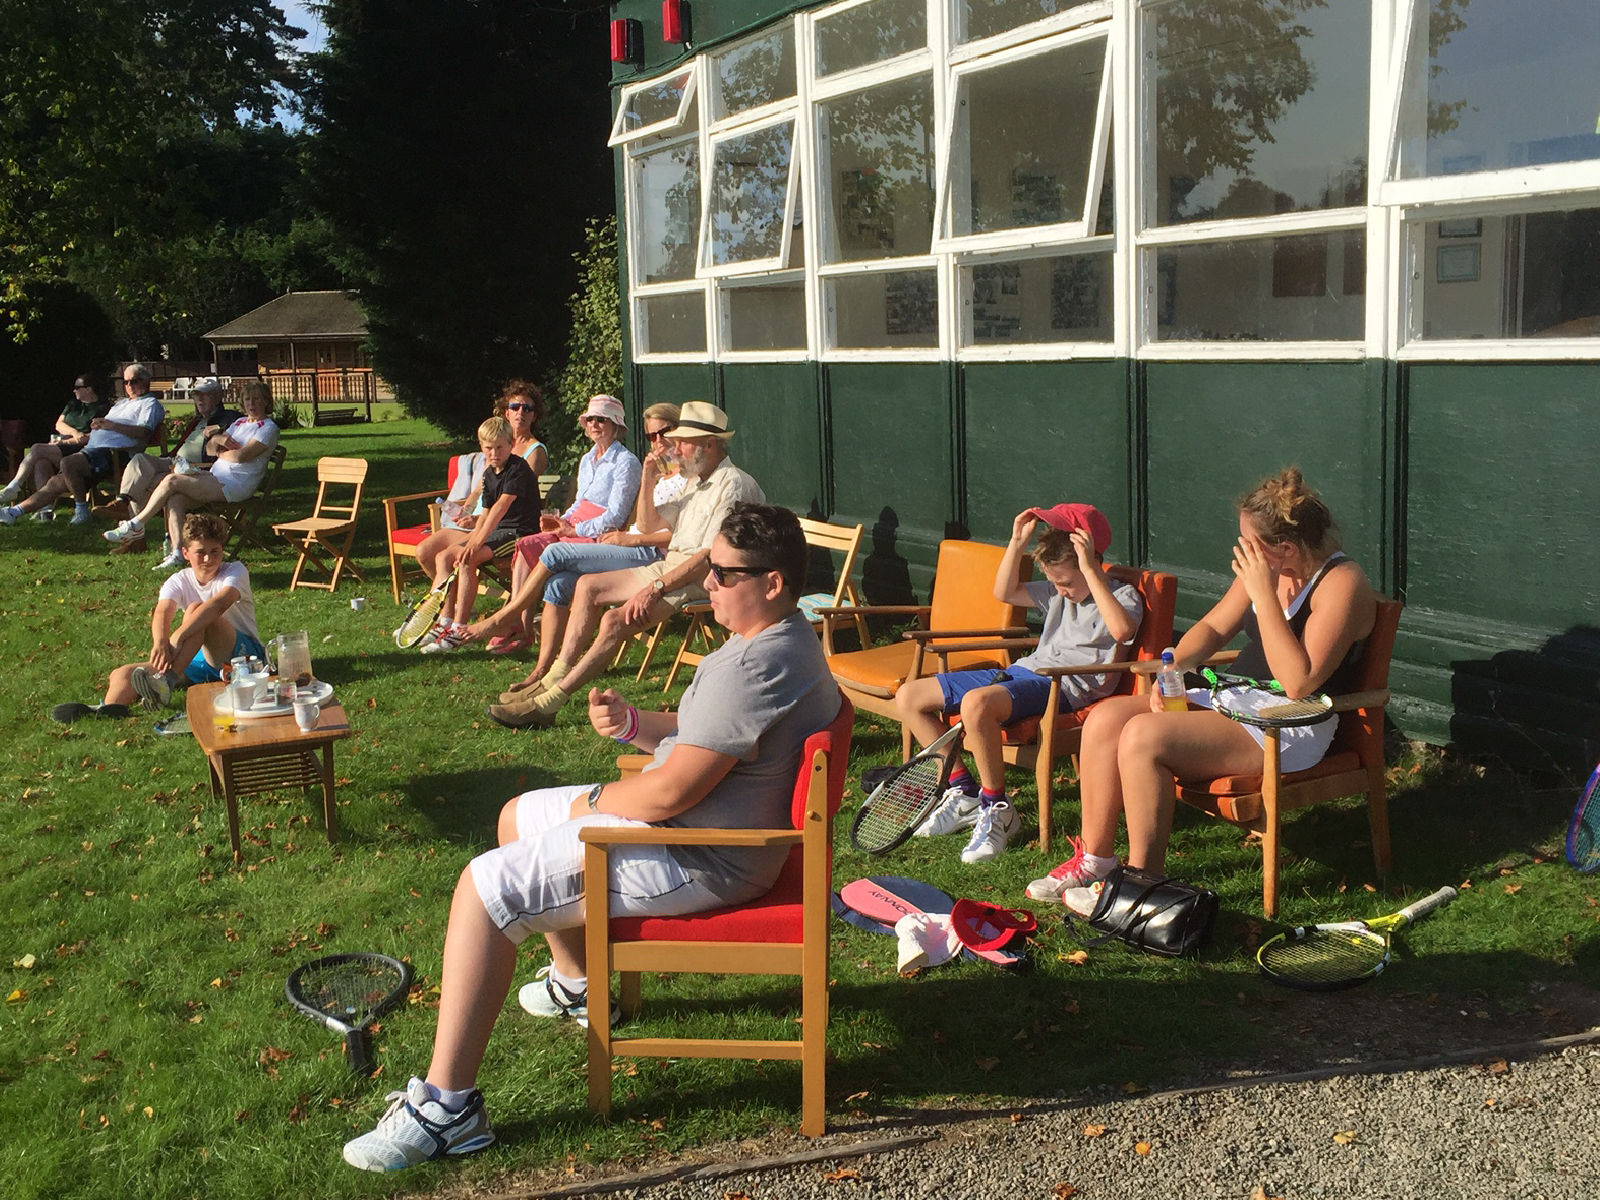 Worfield Tennis Club is a great little secret in the heart of the Shropshire country - Psst close to Bridgnorth